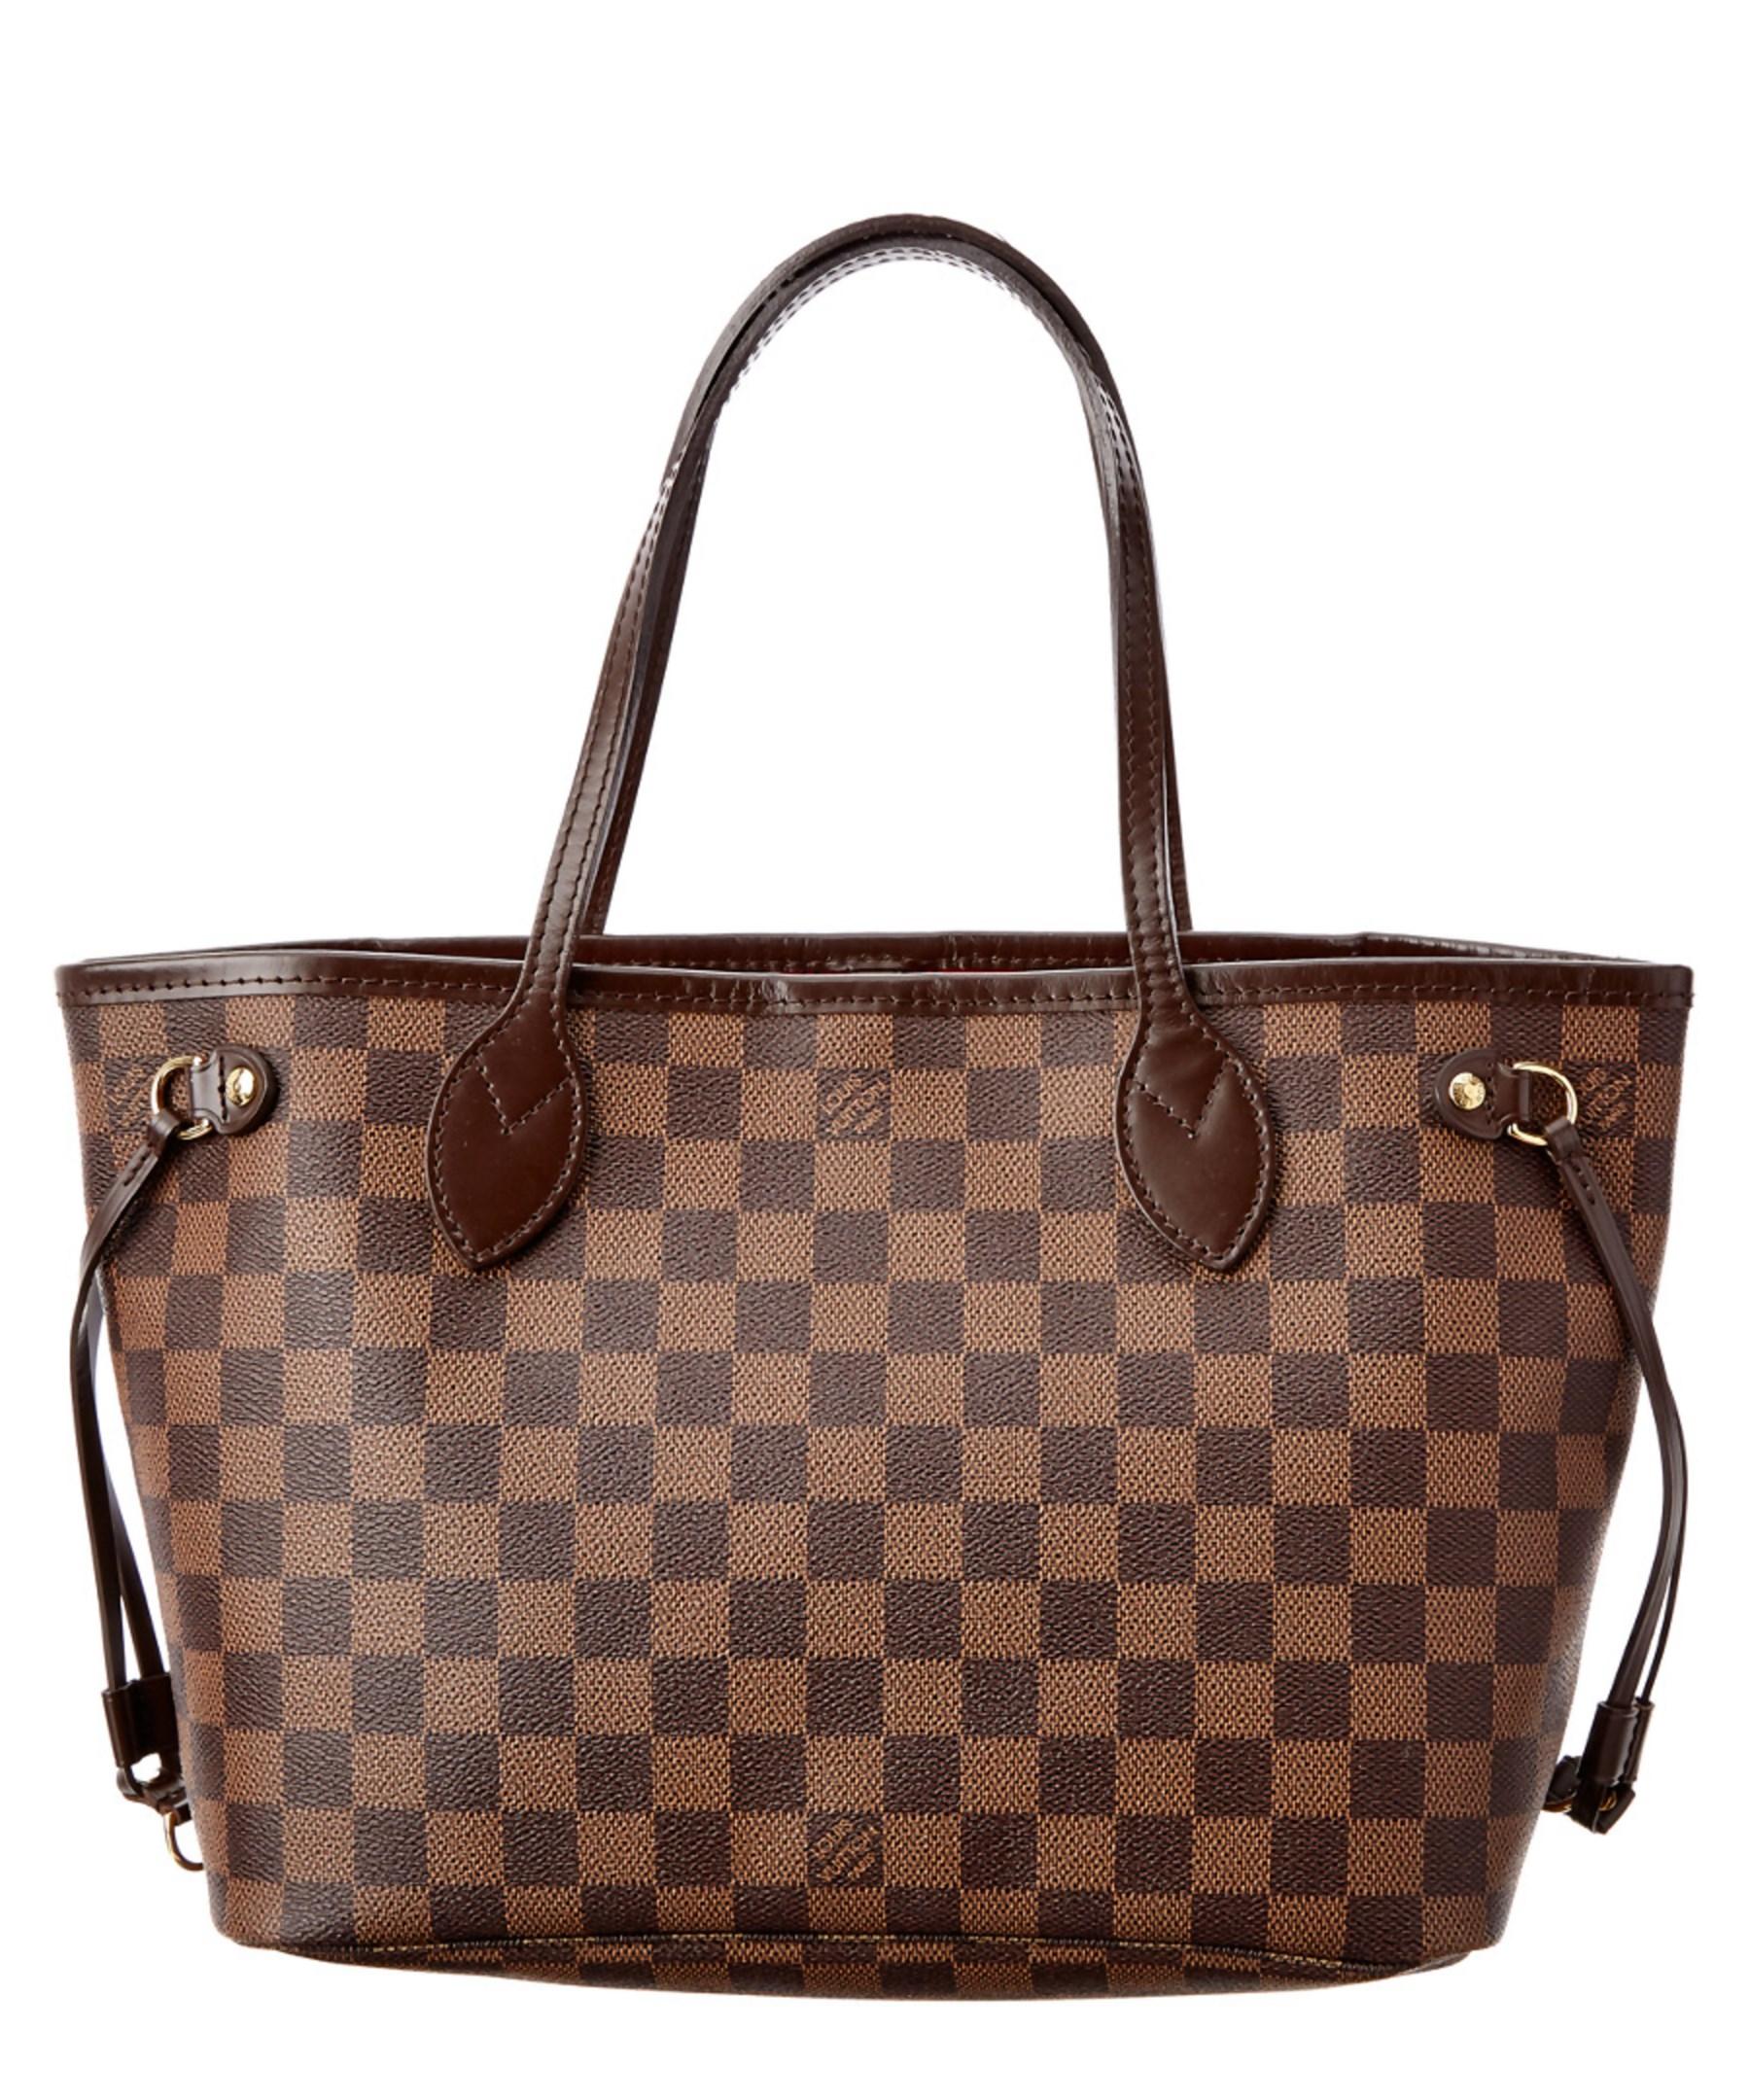 Lyst - Louis Vuitton Damier Ebene Canvas Neverfull Pm in Brown